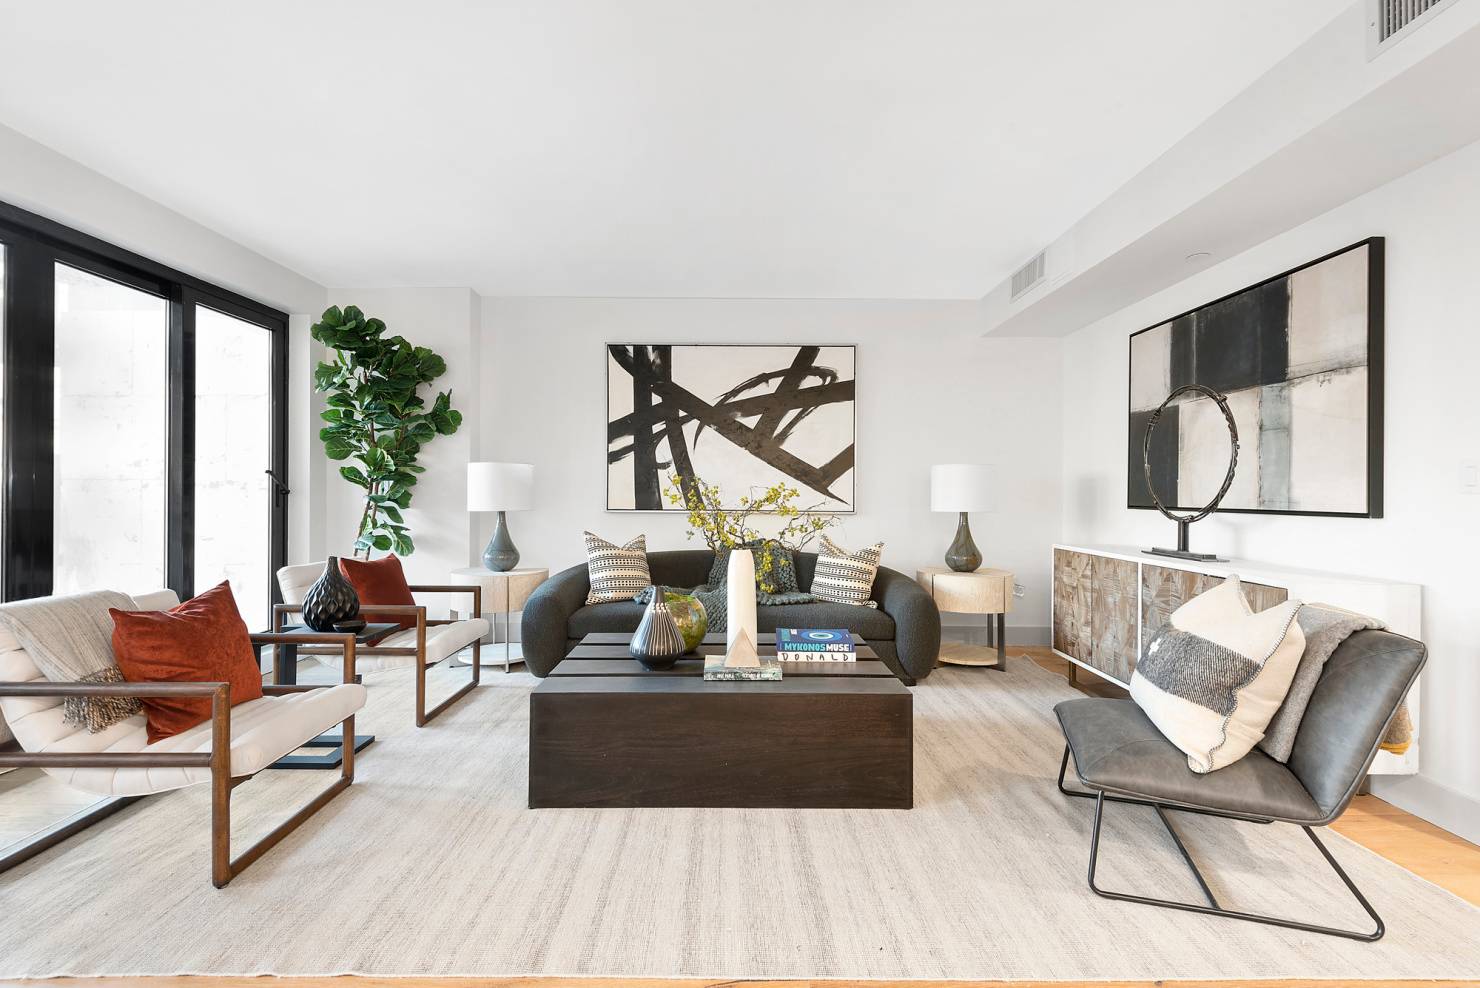 Welcome to 169 Eagle Street a beautifully appointed new boutique condominium in prime Greenpoint, Brooklyn.